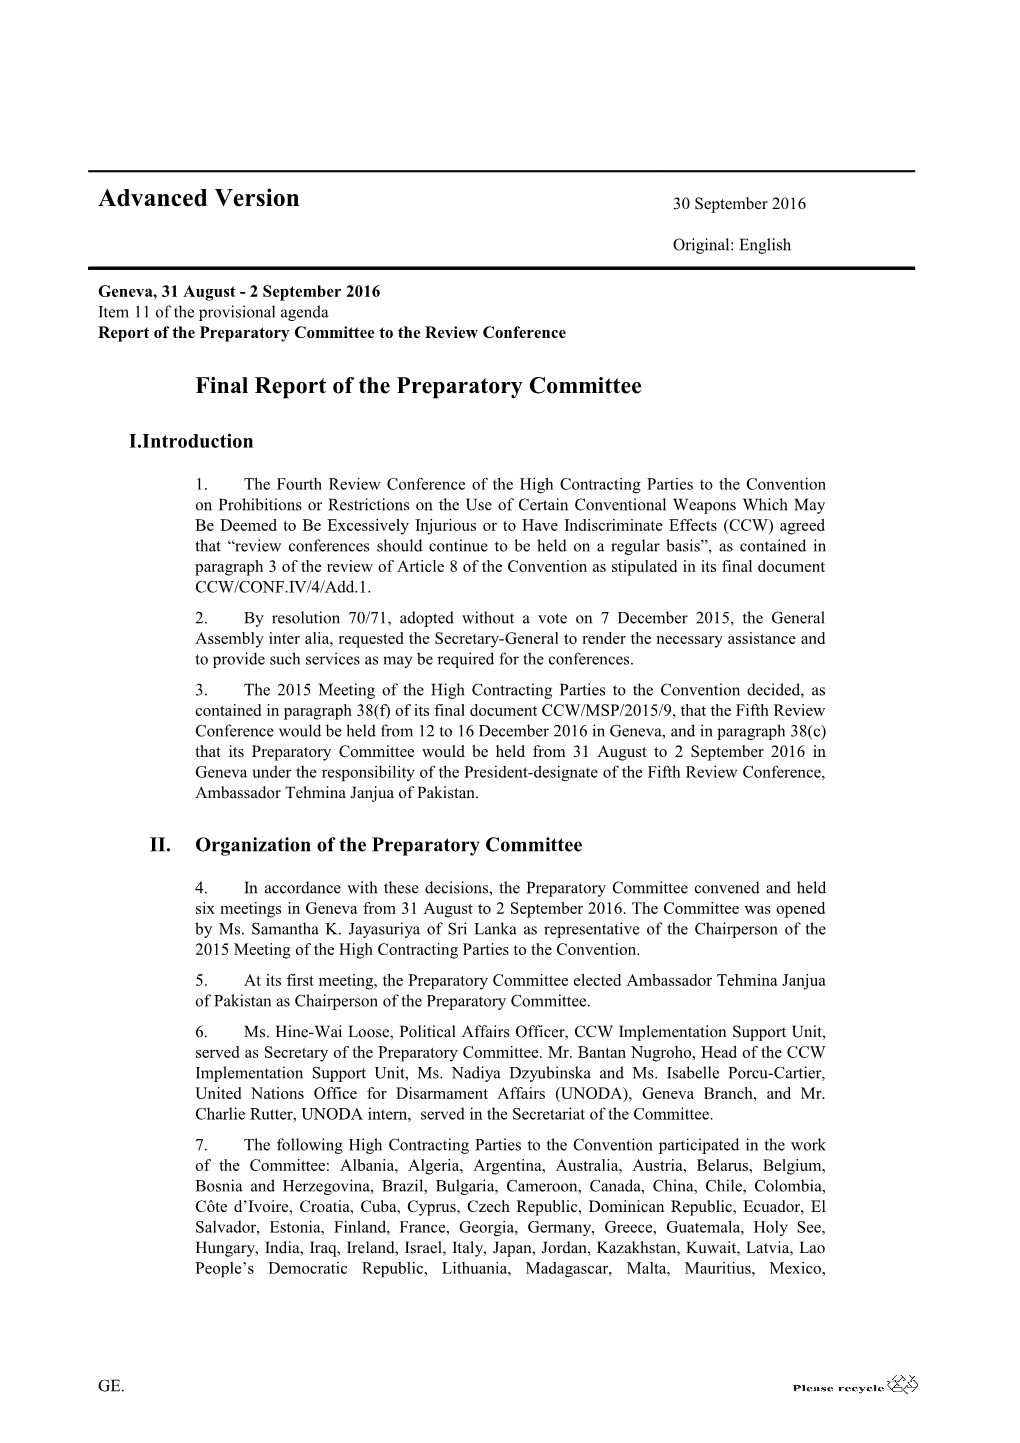 Report of the Preparatory Committeeto the Review Conference